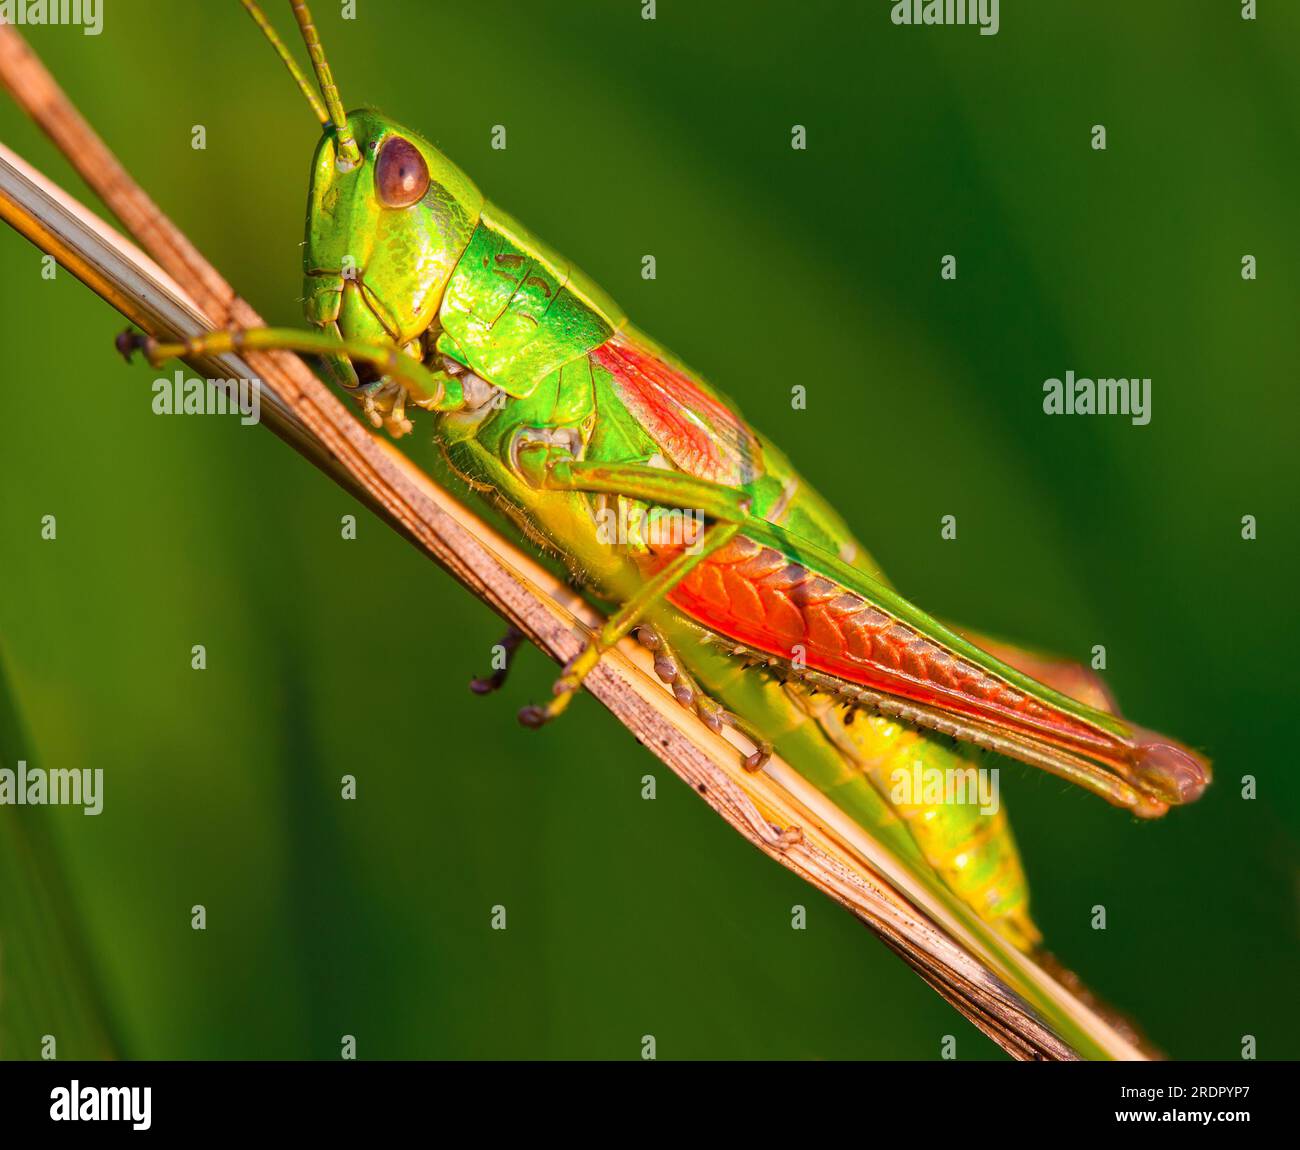 Grasshopper on a halm of grass in summer Stock Photo